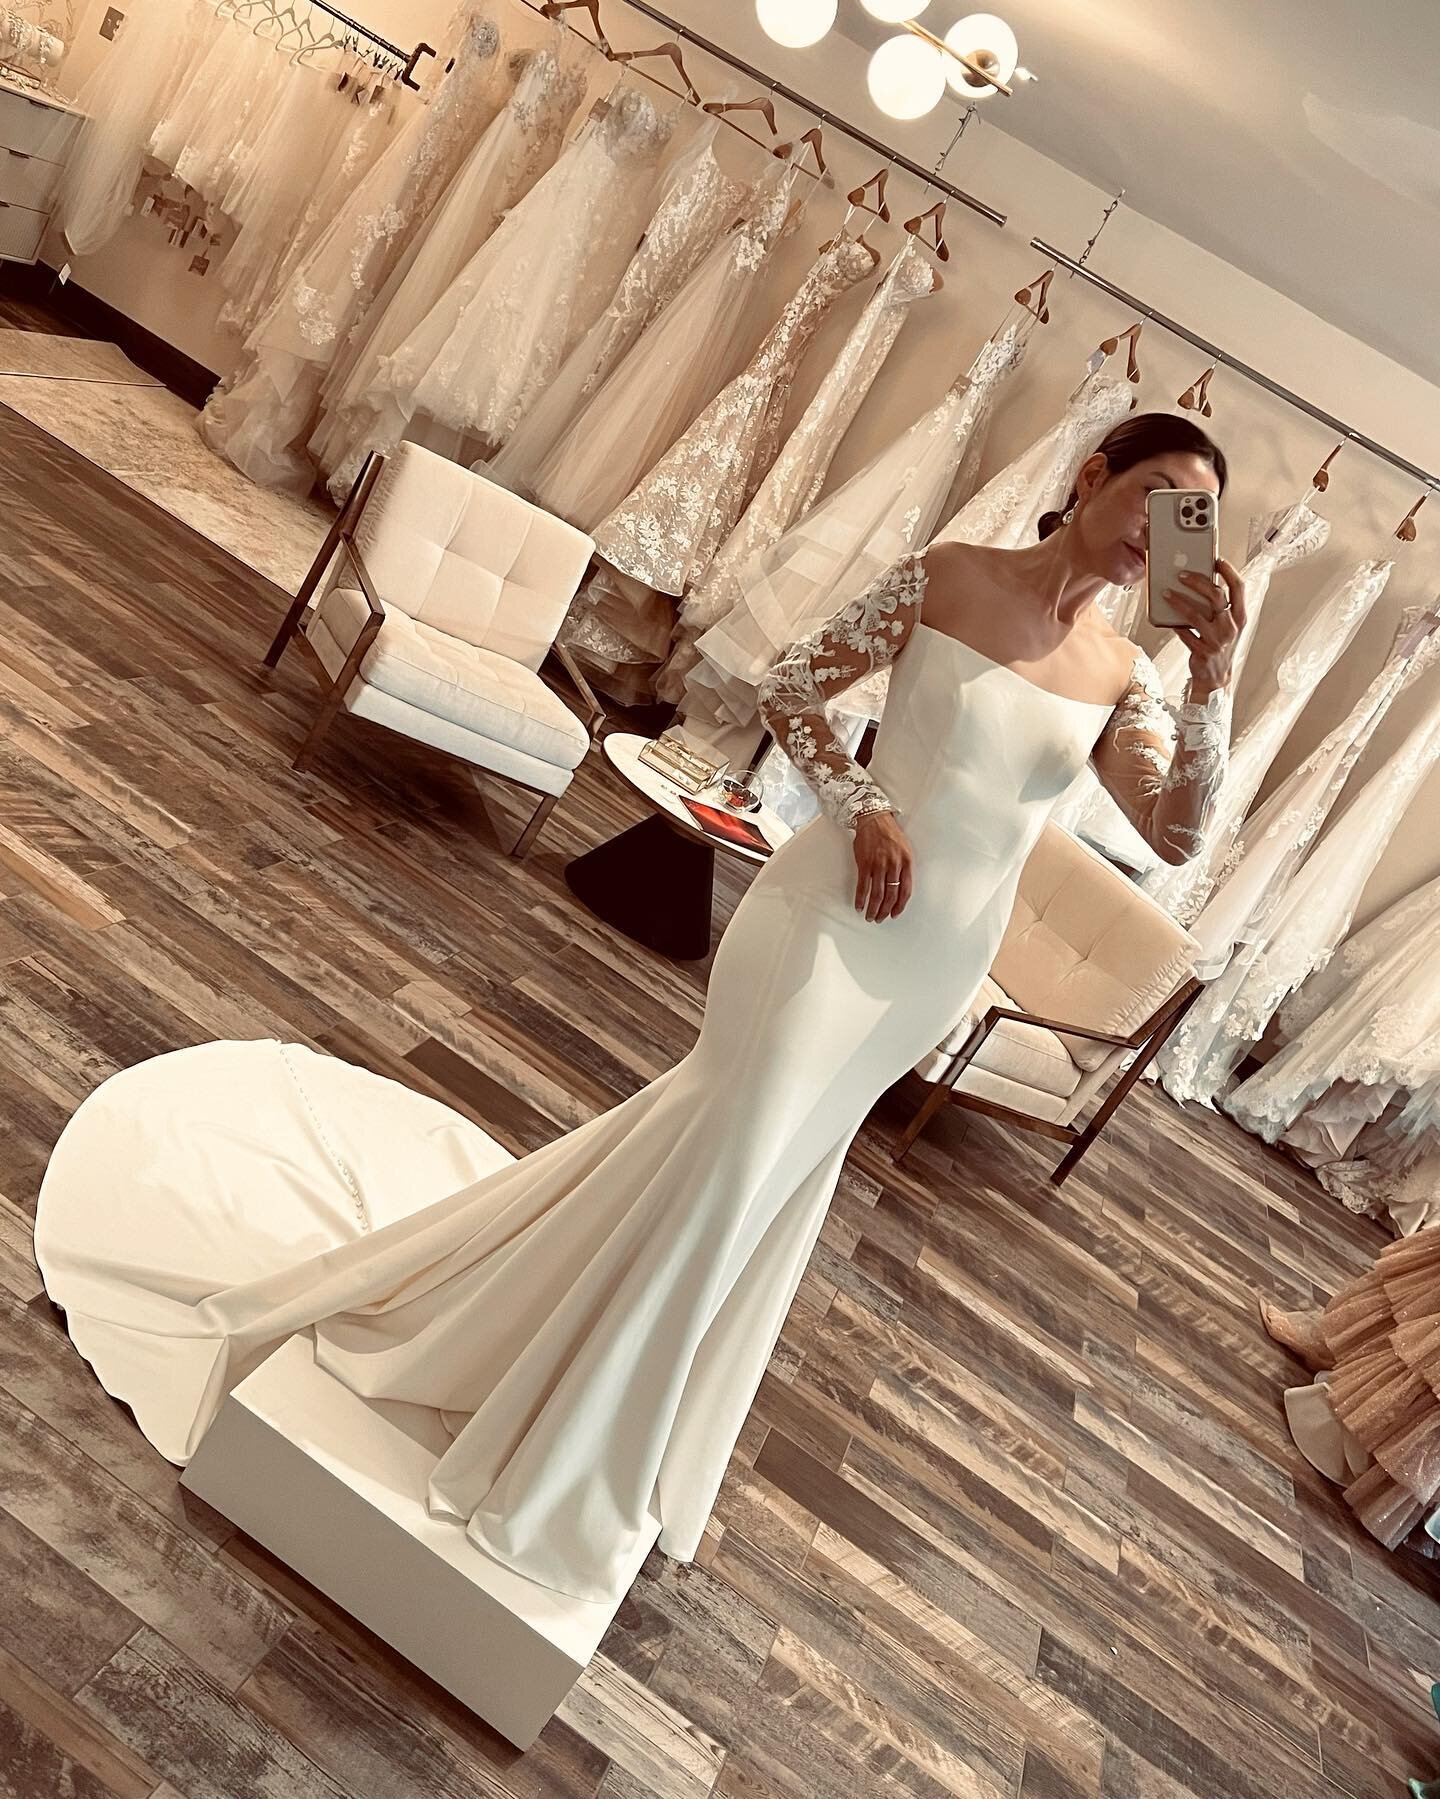 Meet Grace Gown by @eddyk_bridal ✨🤩
.
.
.
By appointment only (520)9002019